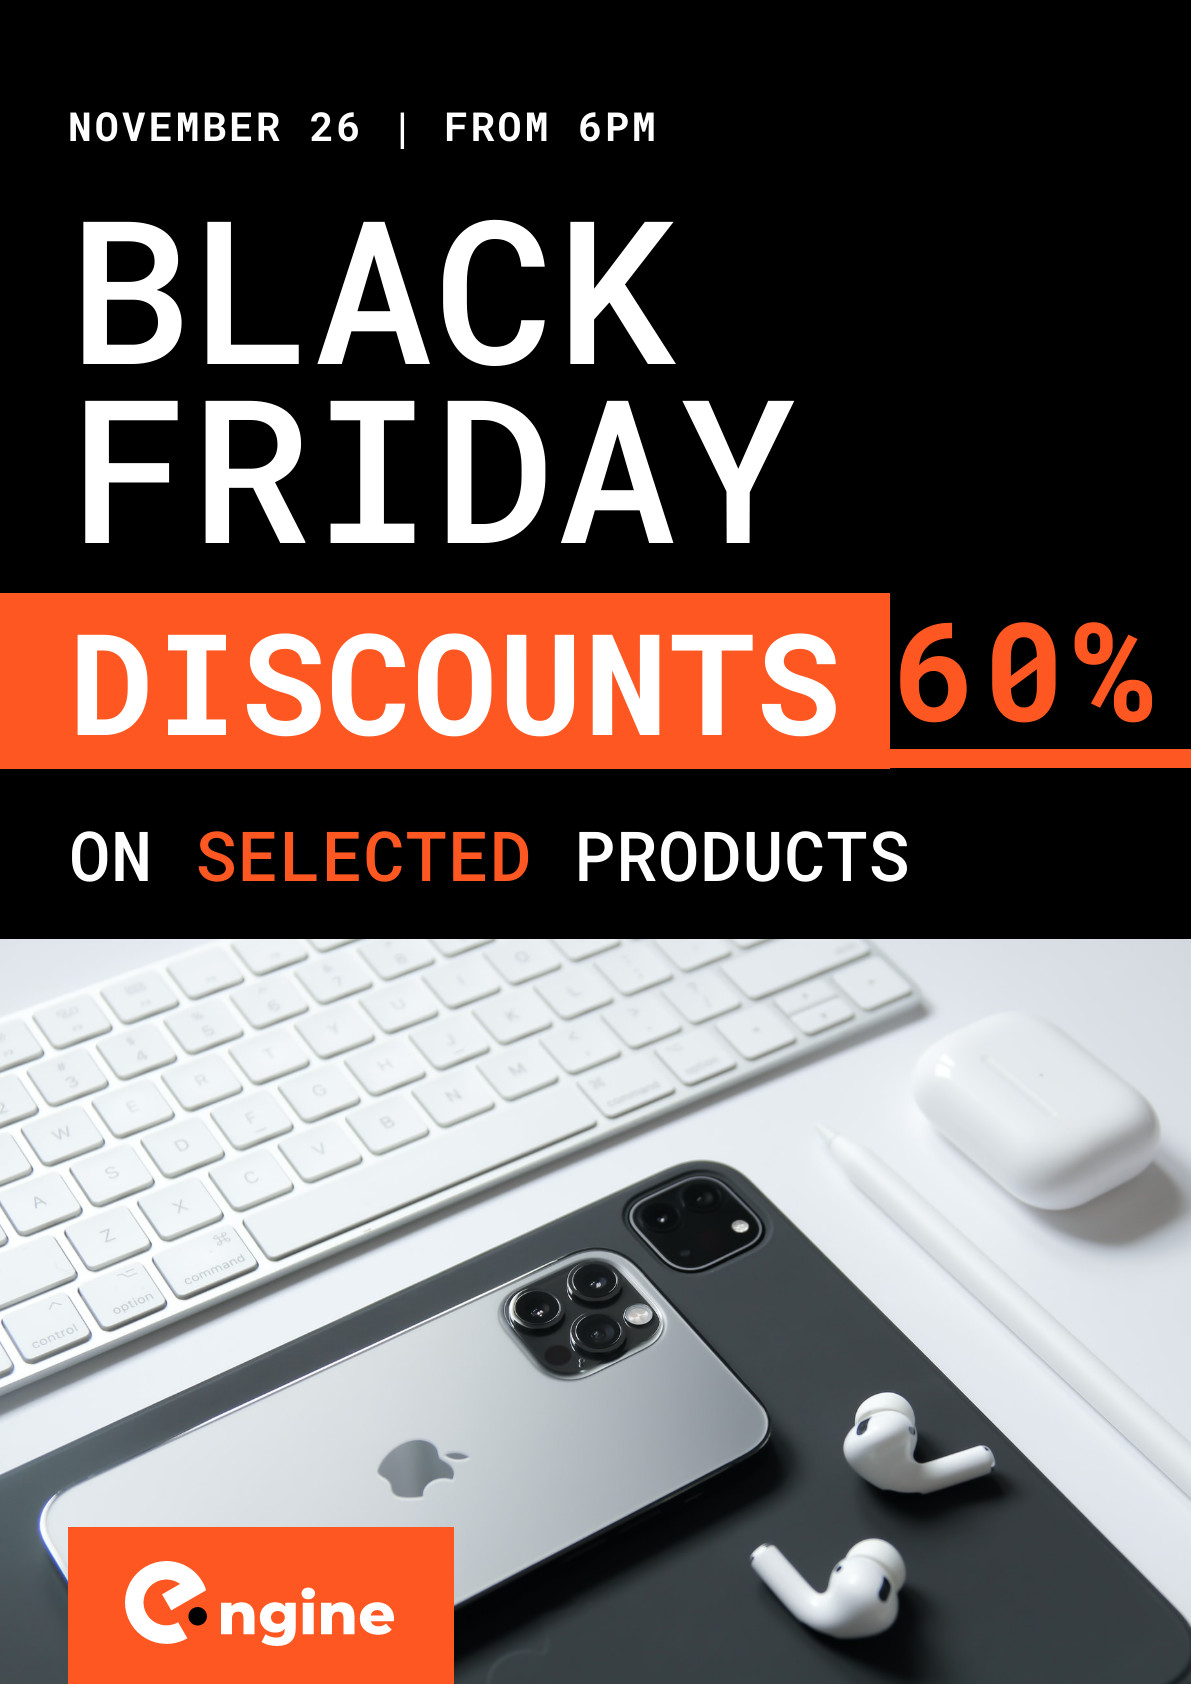 Black Friday Discounts Poster Template 1191x1684